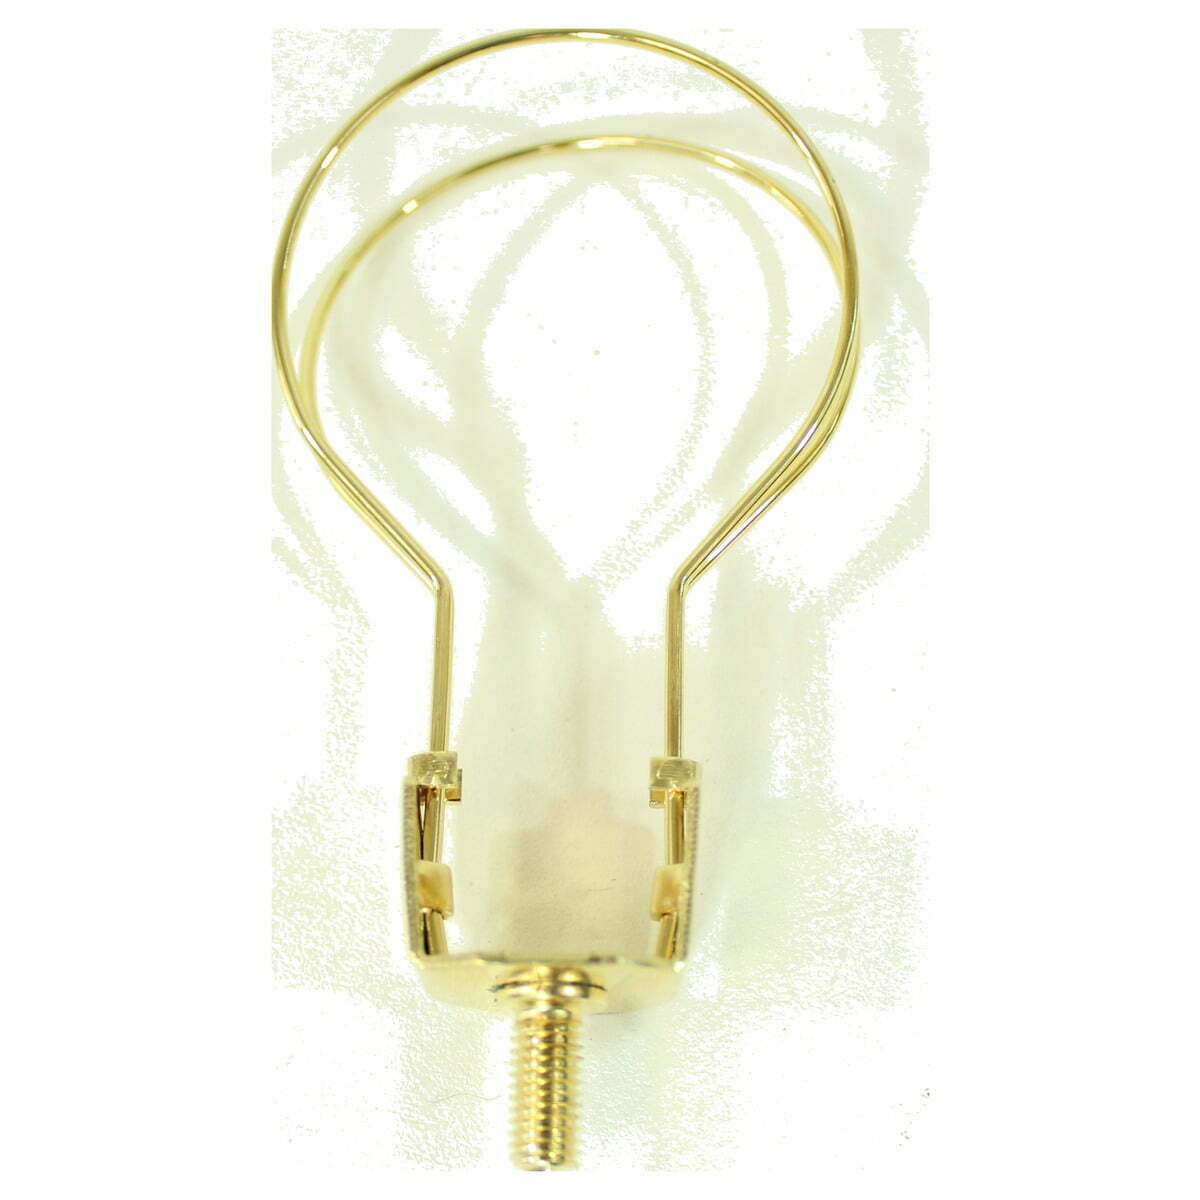 https://www.vacuumsrus.com/wp-content/uploads/2020/03/bulb-clip-for-shade-brass-plated-a-19-type-medium-base-clip-on-bulb-clip-1-4-27-threaded-top.jpg